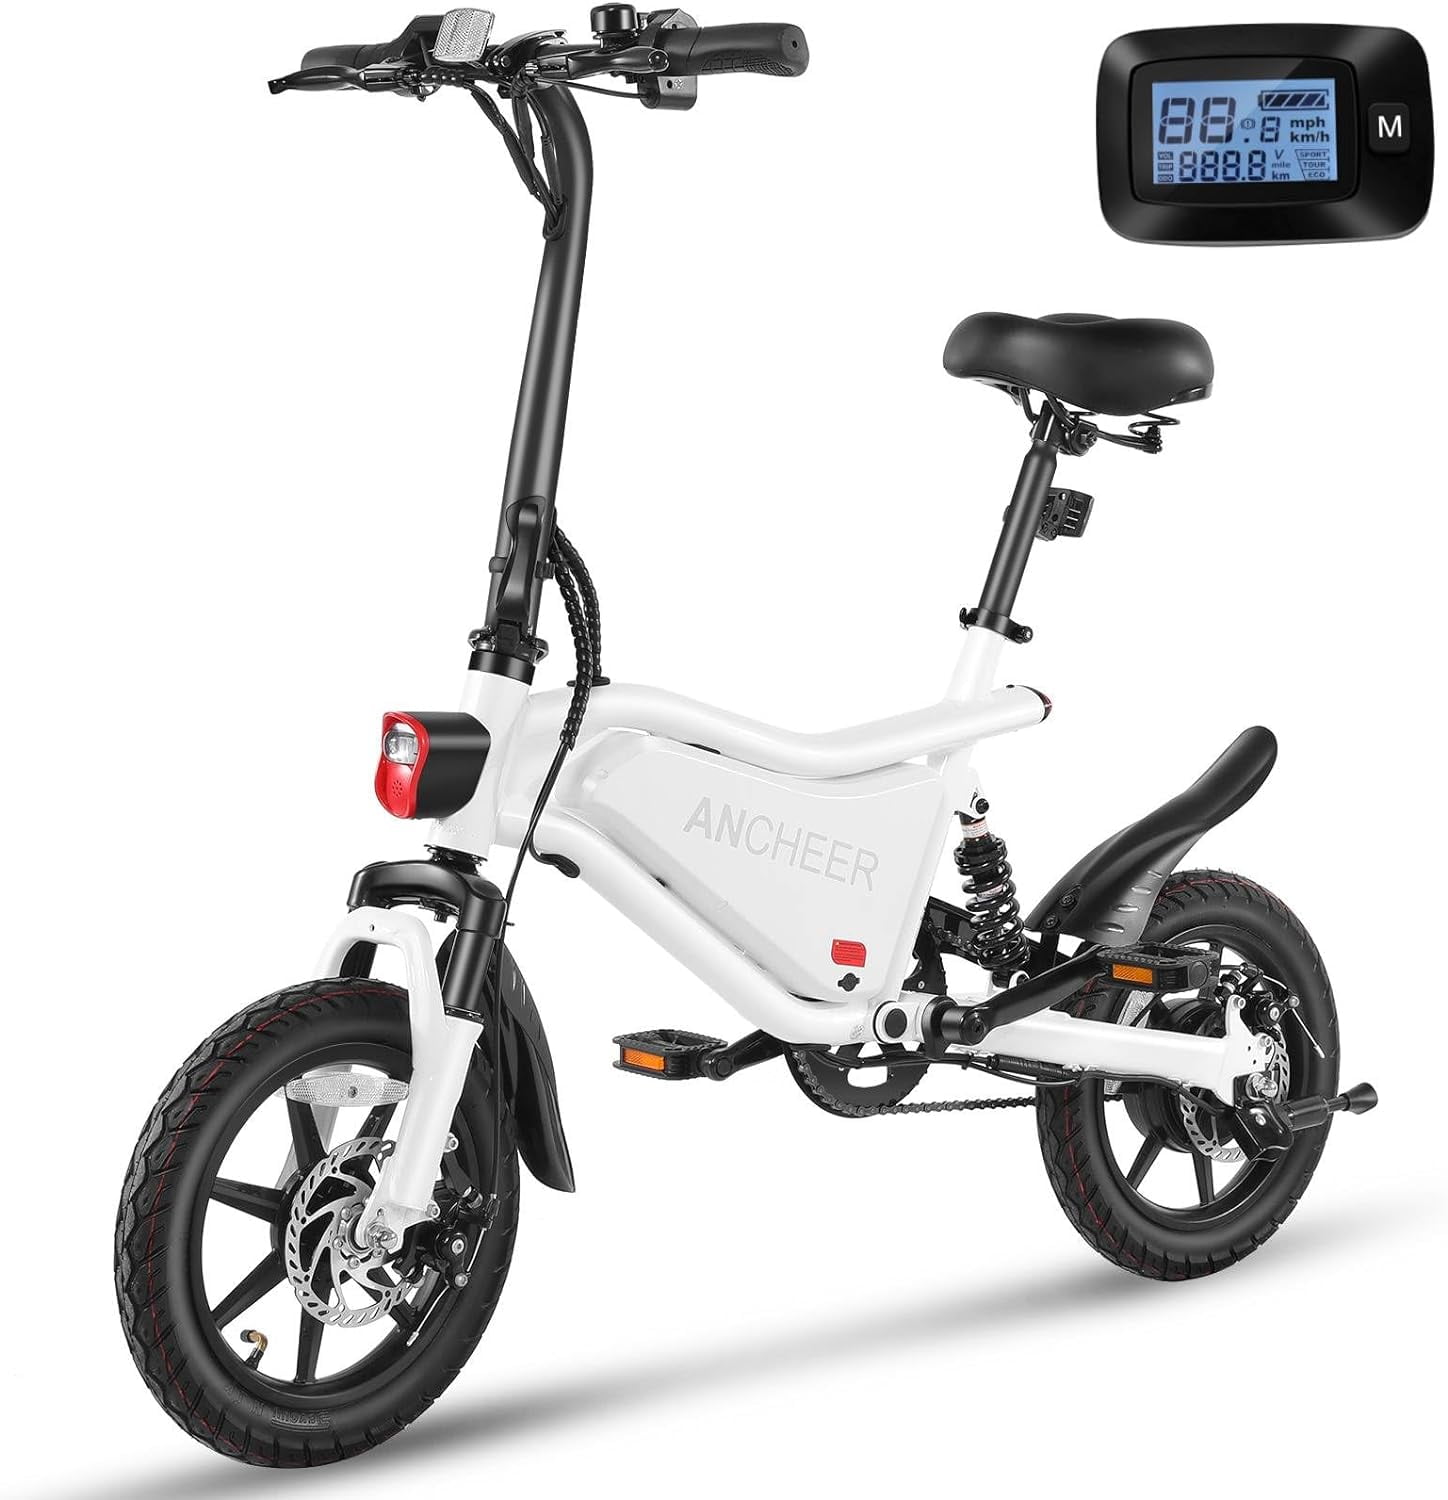 ANCHEER 500W Electric Bike for Adults, Foldable Electric Bikes with 48V 374Wh Battery, 14" Electric Bicycle for Men Women, LCD Digital Display, Cruise Control Ebikes, Dual Suspension Fork UL2849 - image 1 of 9